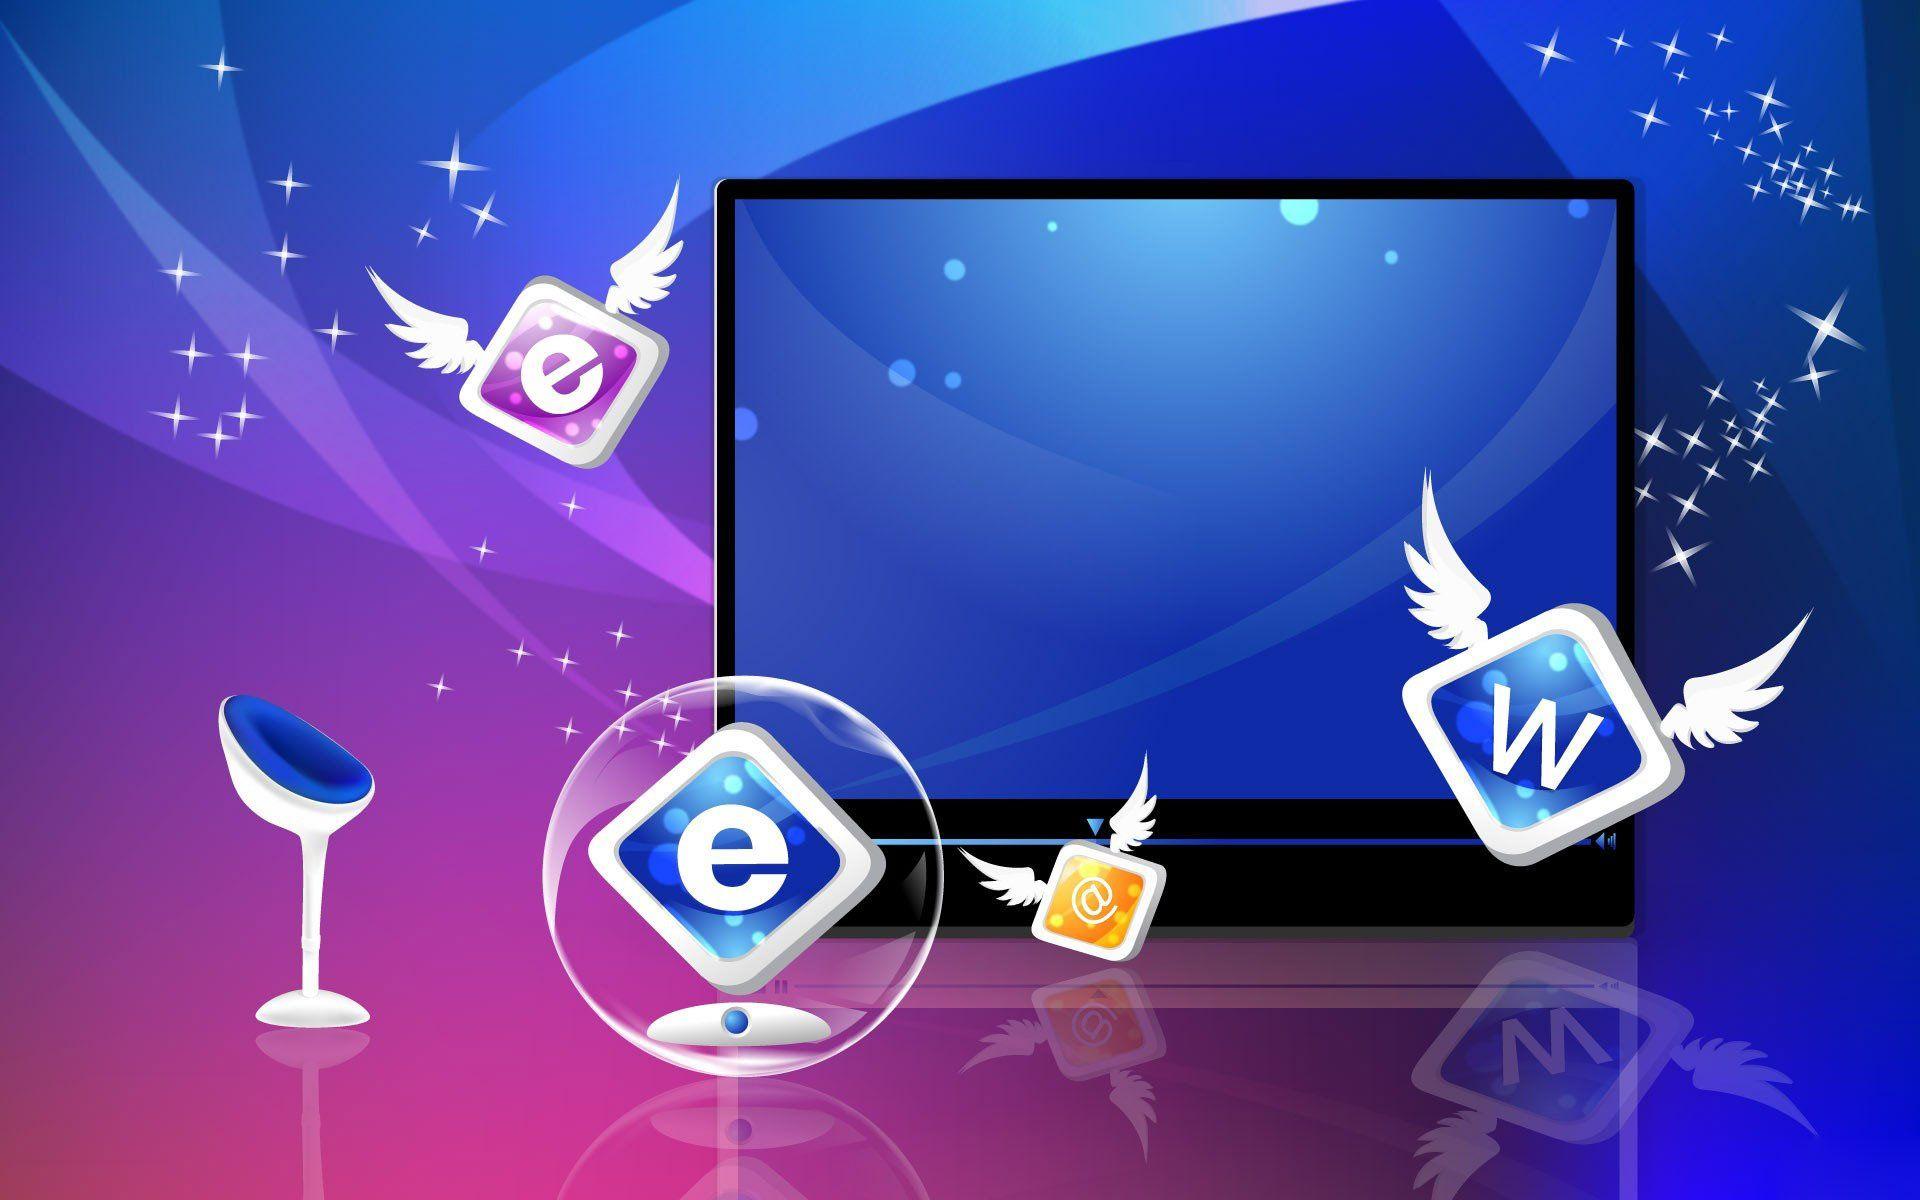 Widescreen FHDQ Wallpaper of Email for Windows and Mac Systems